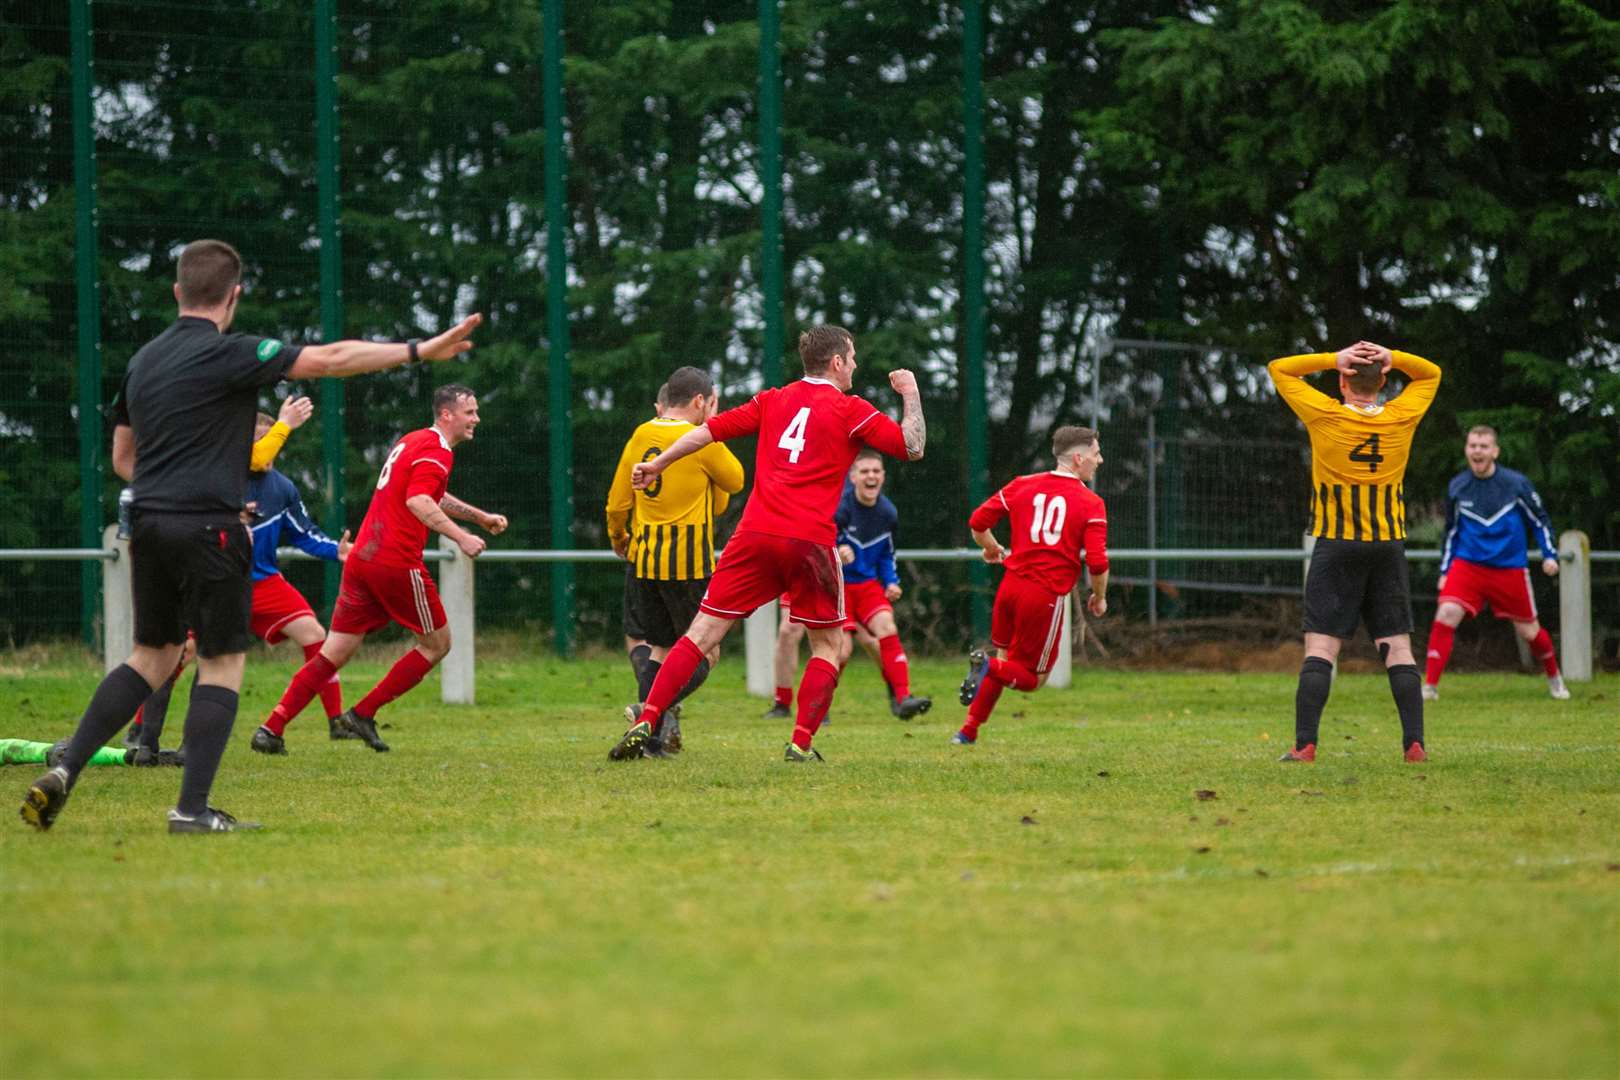 Delight for Forres Thistle as they score a second before half time...Forres Thistle (6) vs Islavale (1) - North Region Juniors - Logie Park, Forres. ..Picture: Daniel Forsyth..